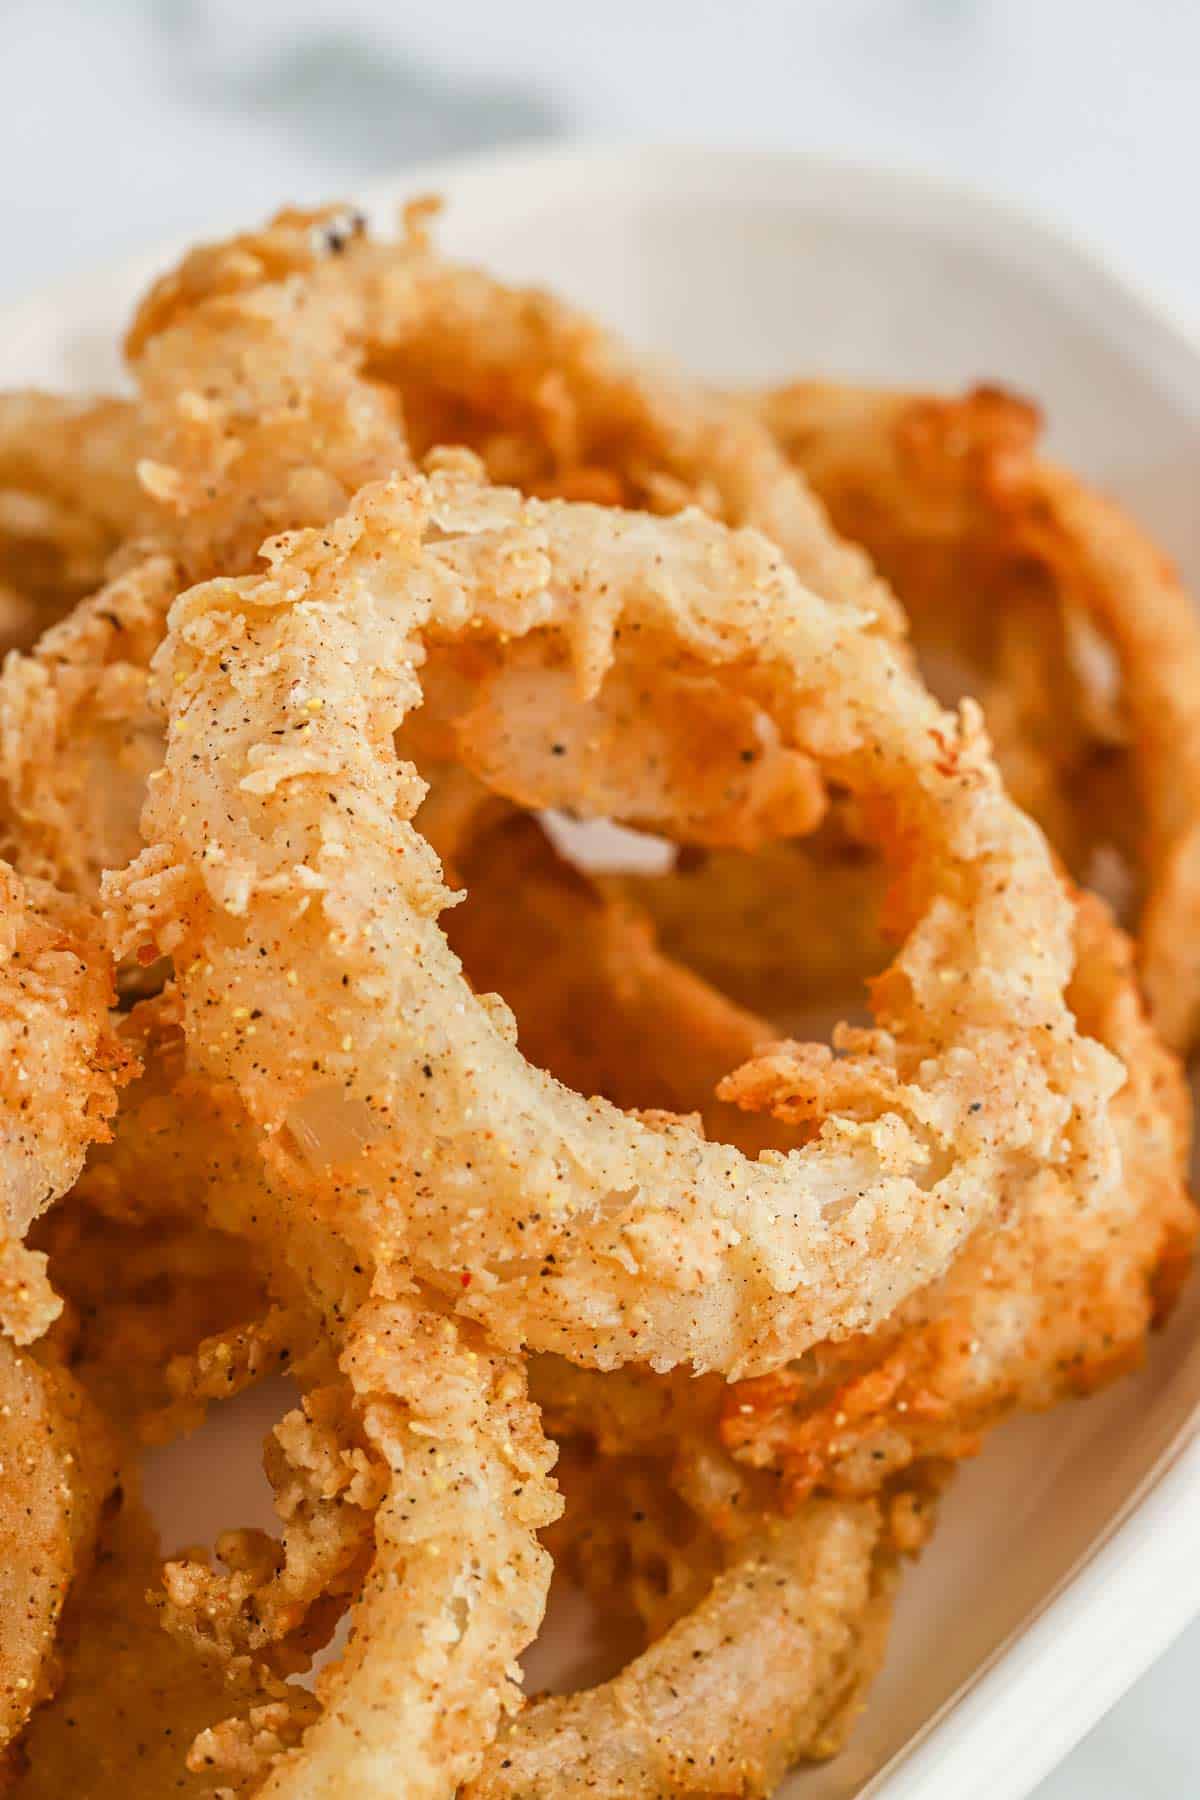 A closeup image of homemade fried onion rings piled on a plate.